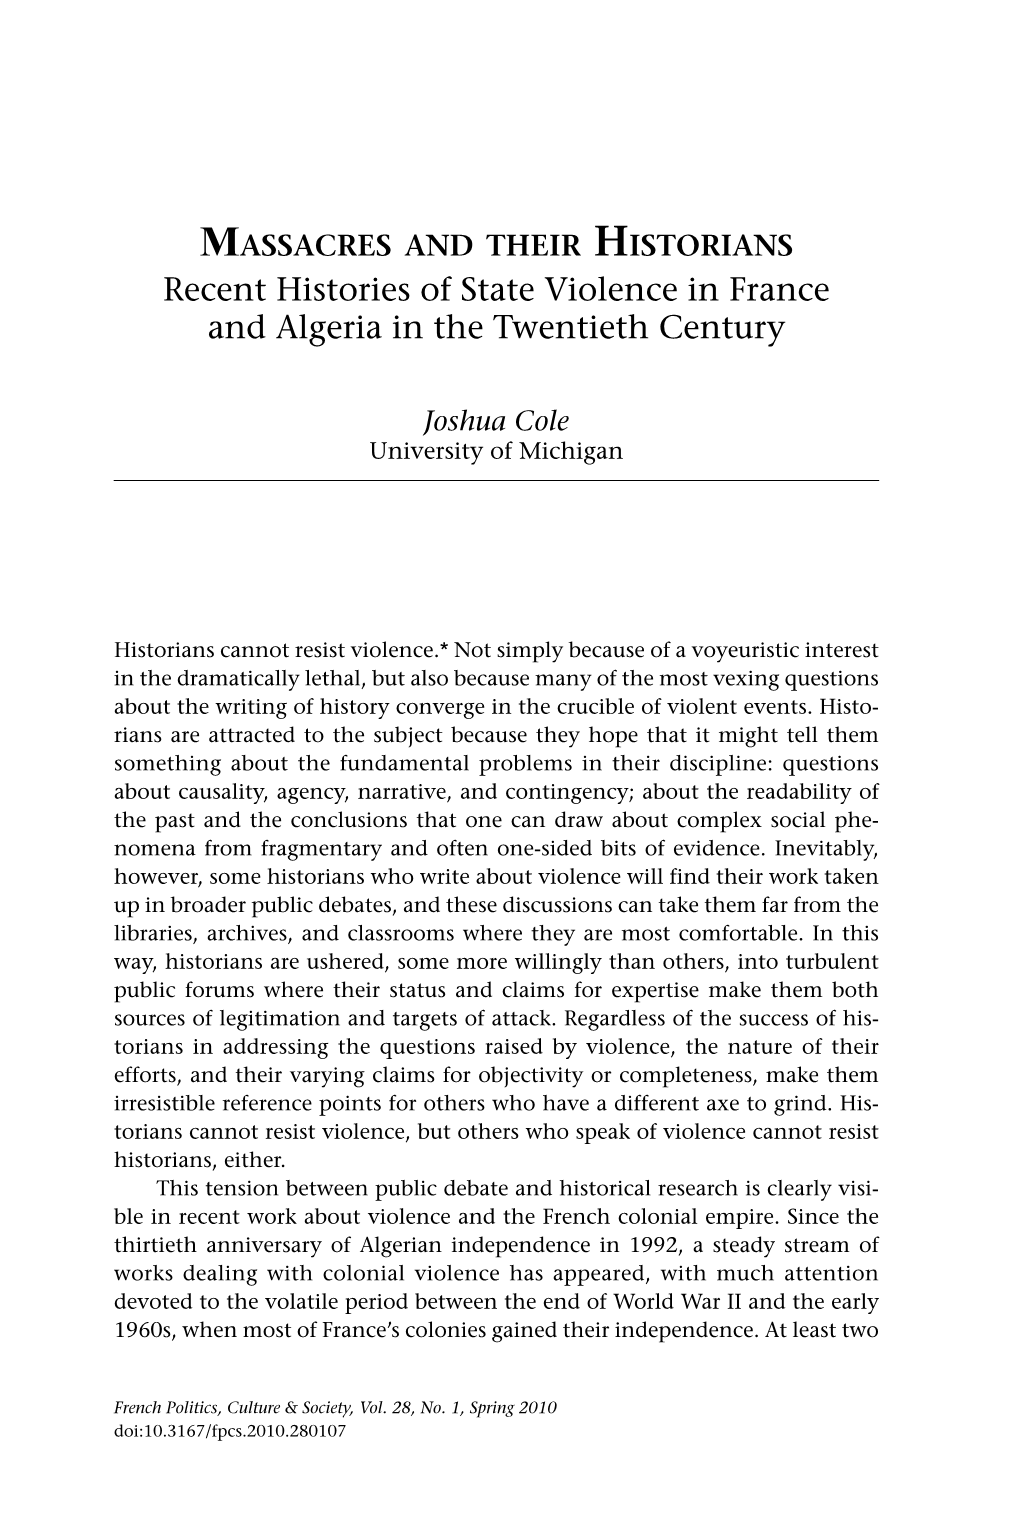 Massacres and Their Historians: Recent Histories of State Violence